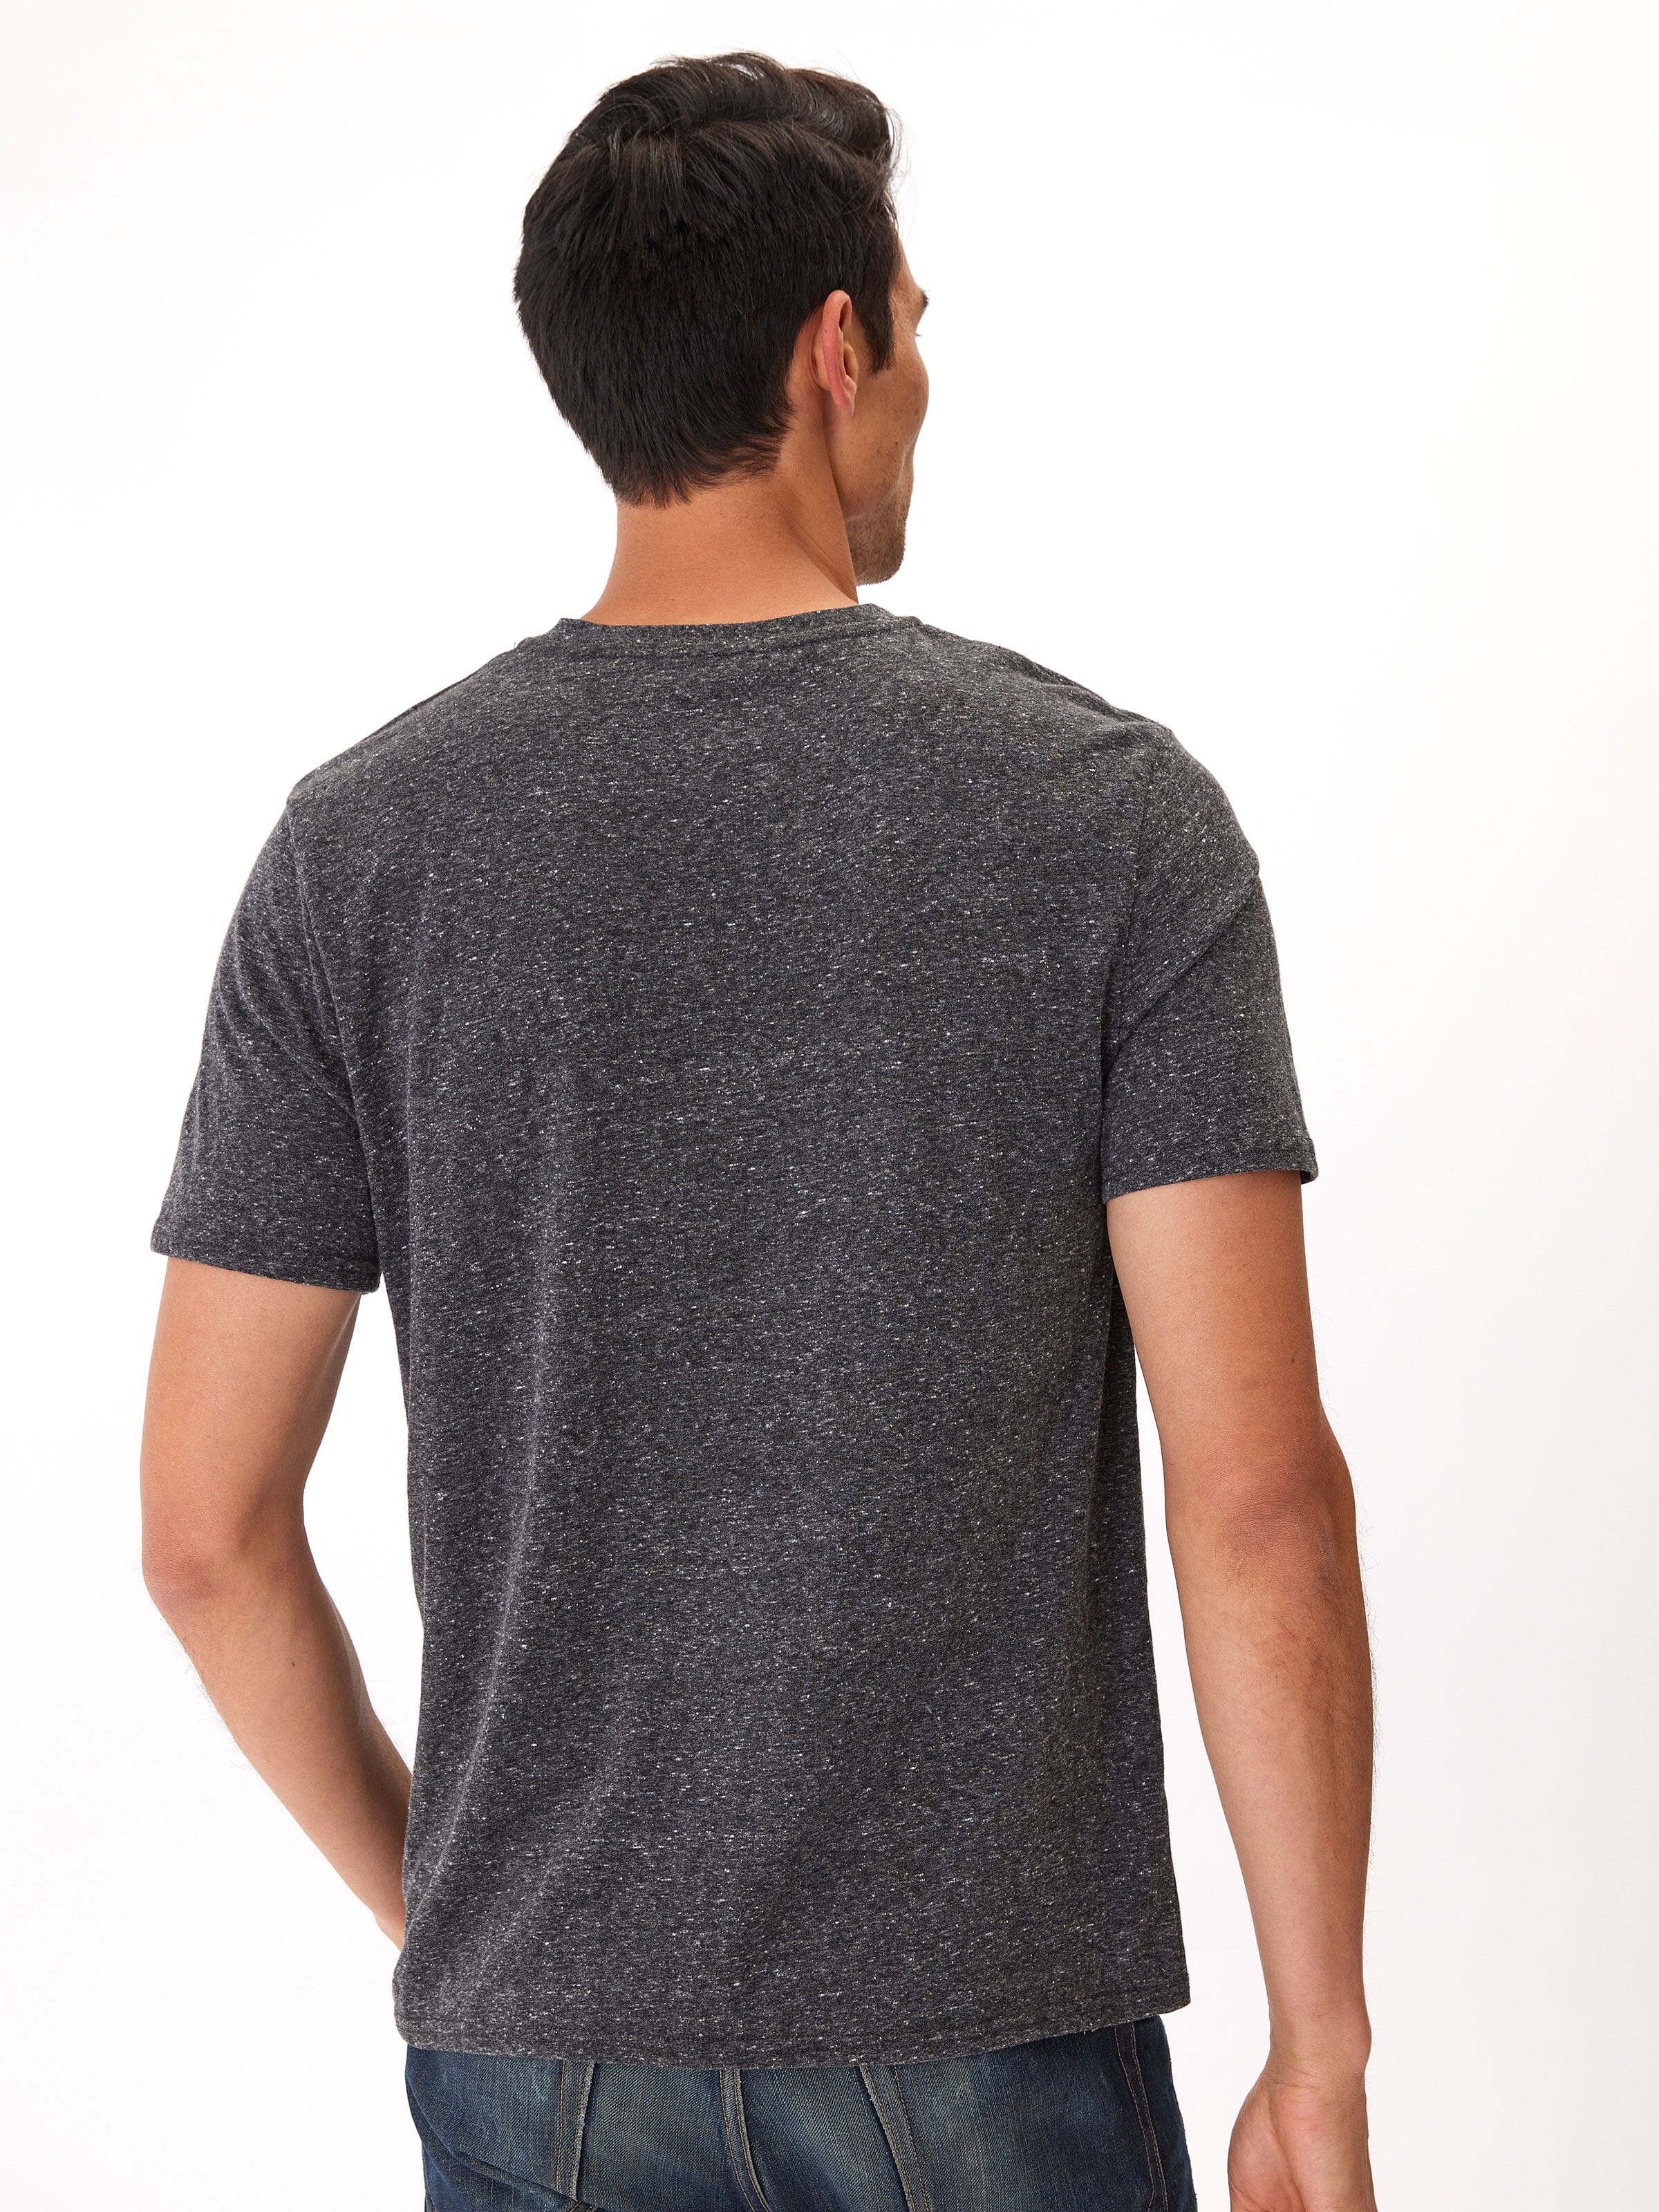 Triblend Crew Neck Heather 4 Threads Grey – Thought in Tee